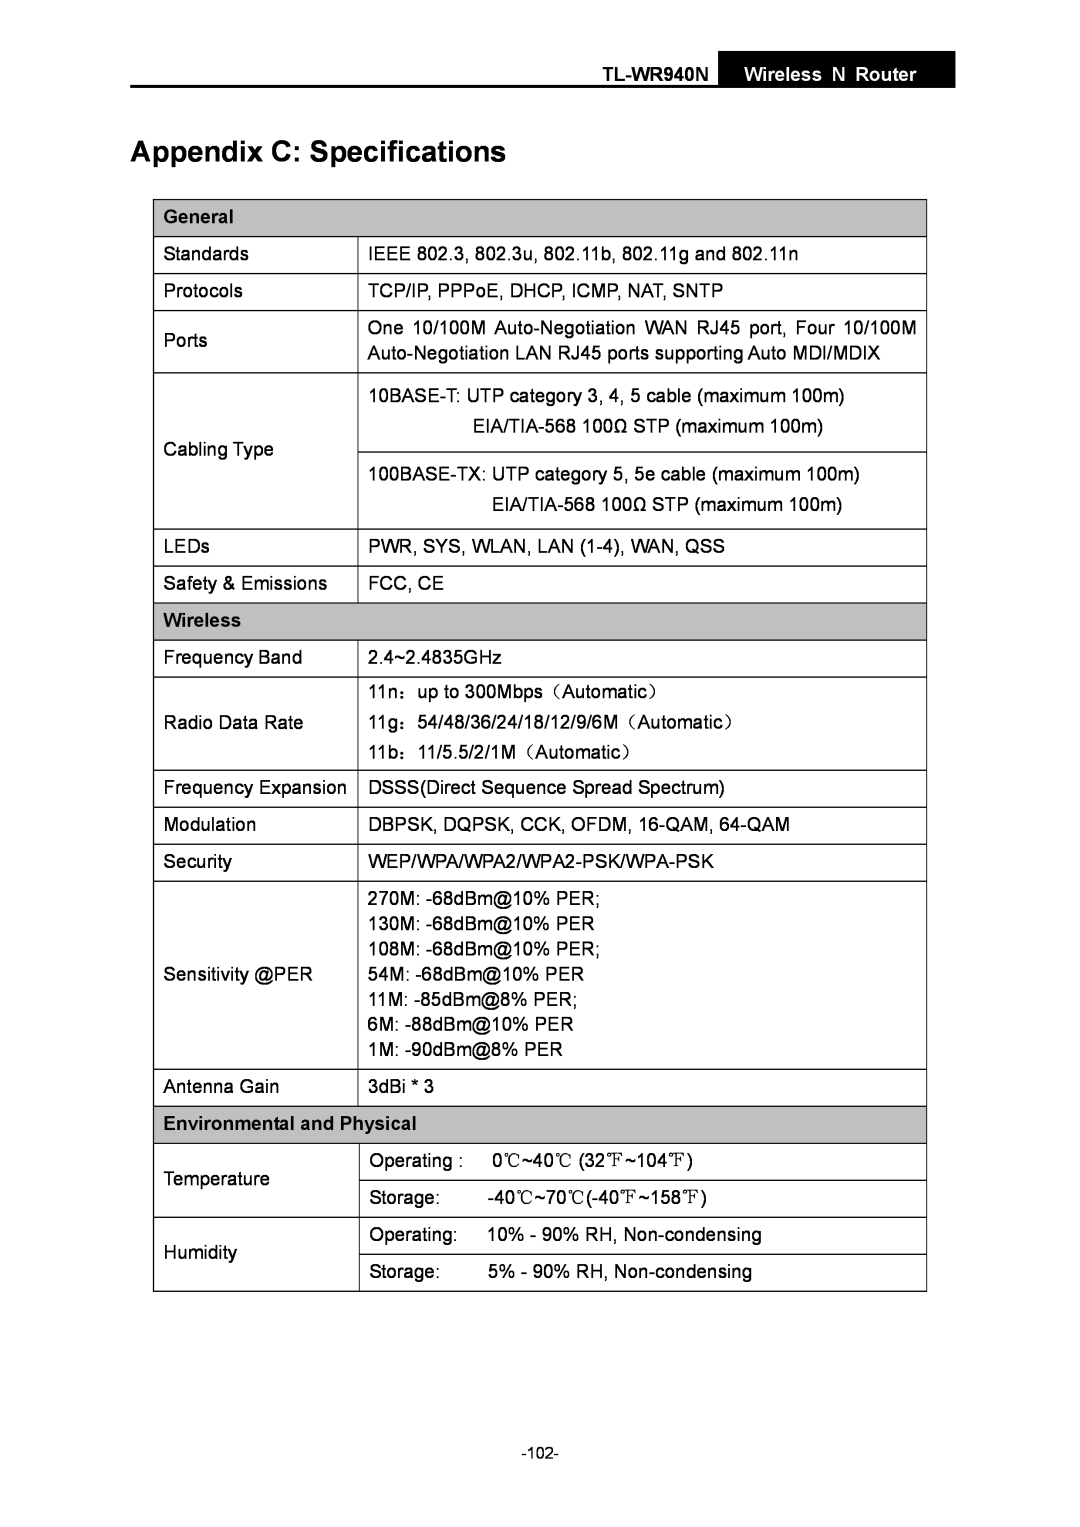 TP-Link manual Appendix C Specifications, General, Environmental and Physical, TL-WR940N Wireless N Router 